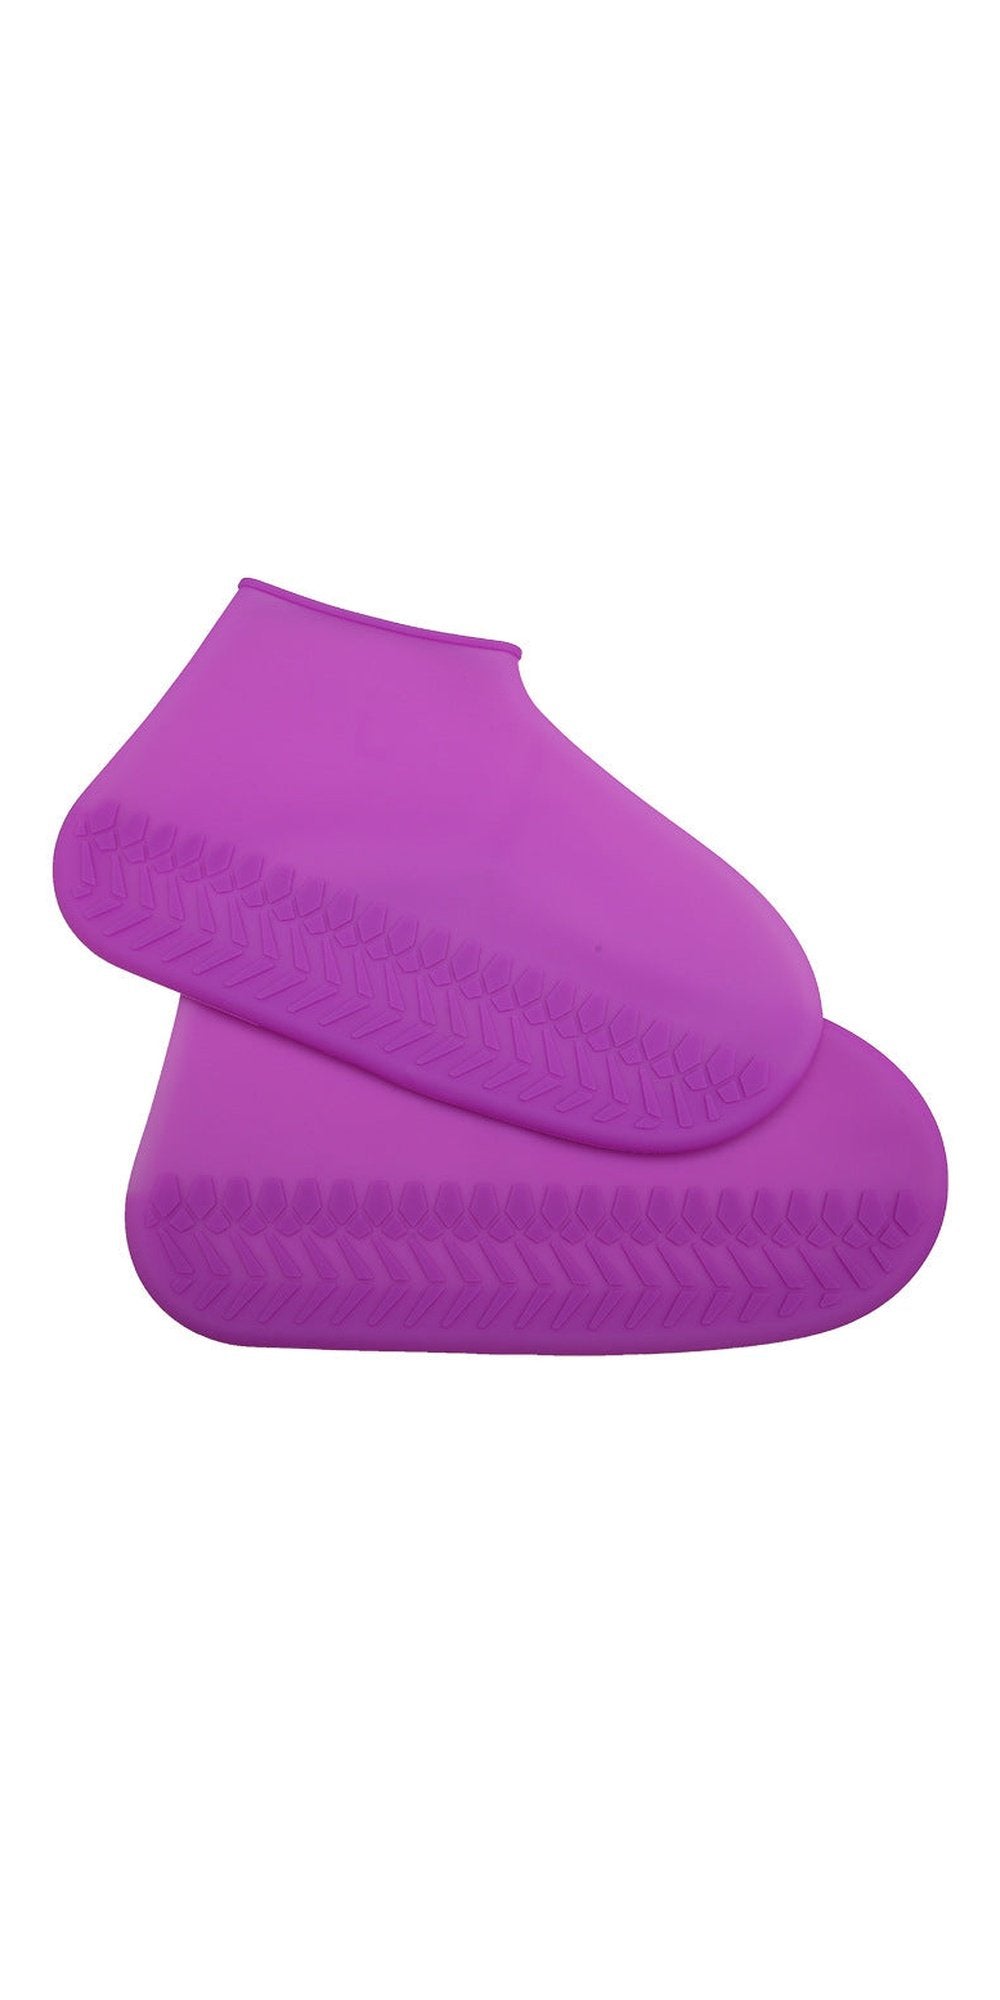 Silicone Waterproof Rain Boot Cover Thickened Non-slip Wear-resistant Sole Shoe Cover